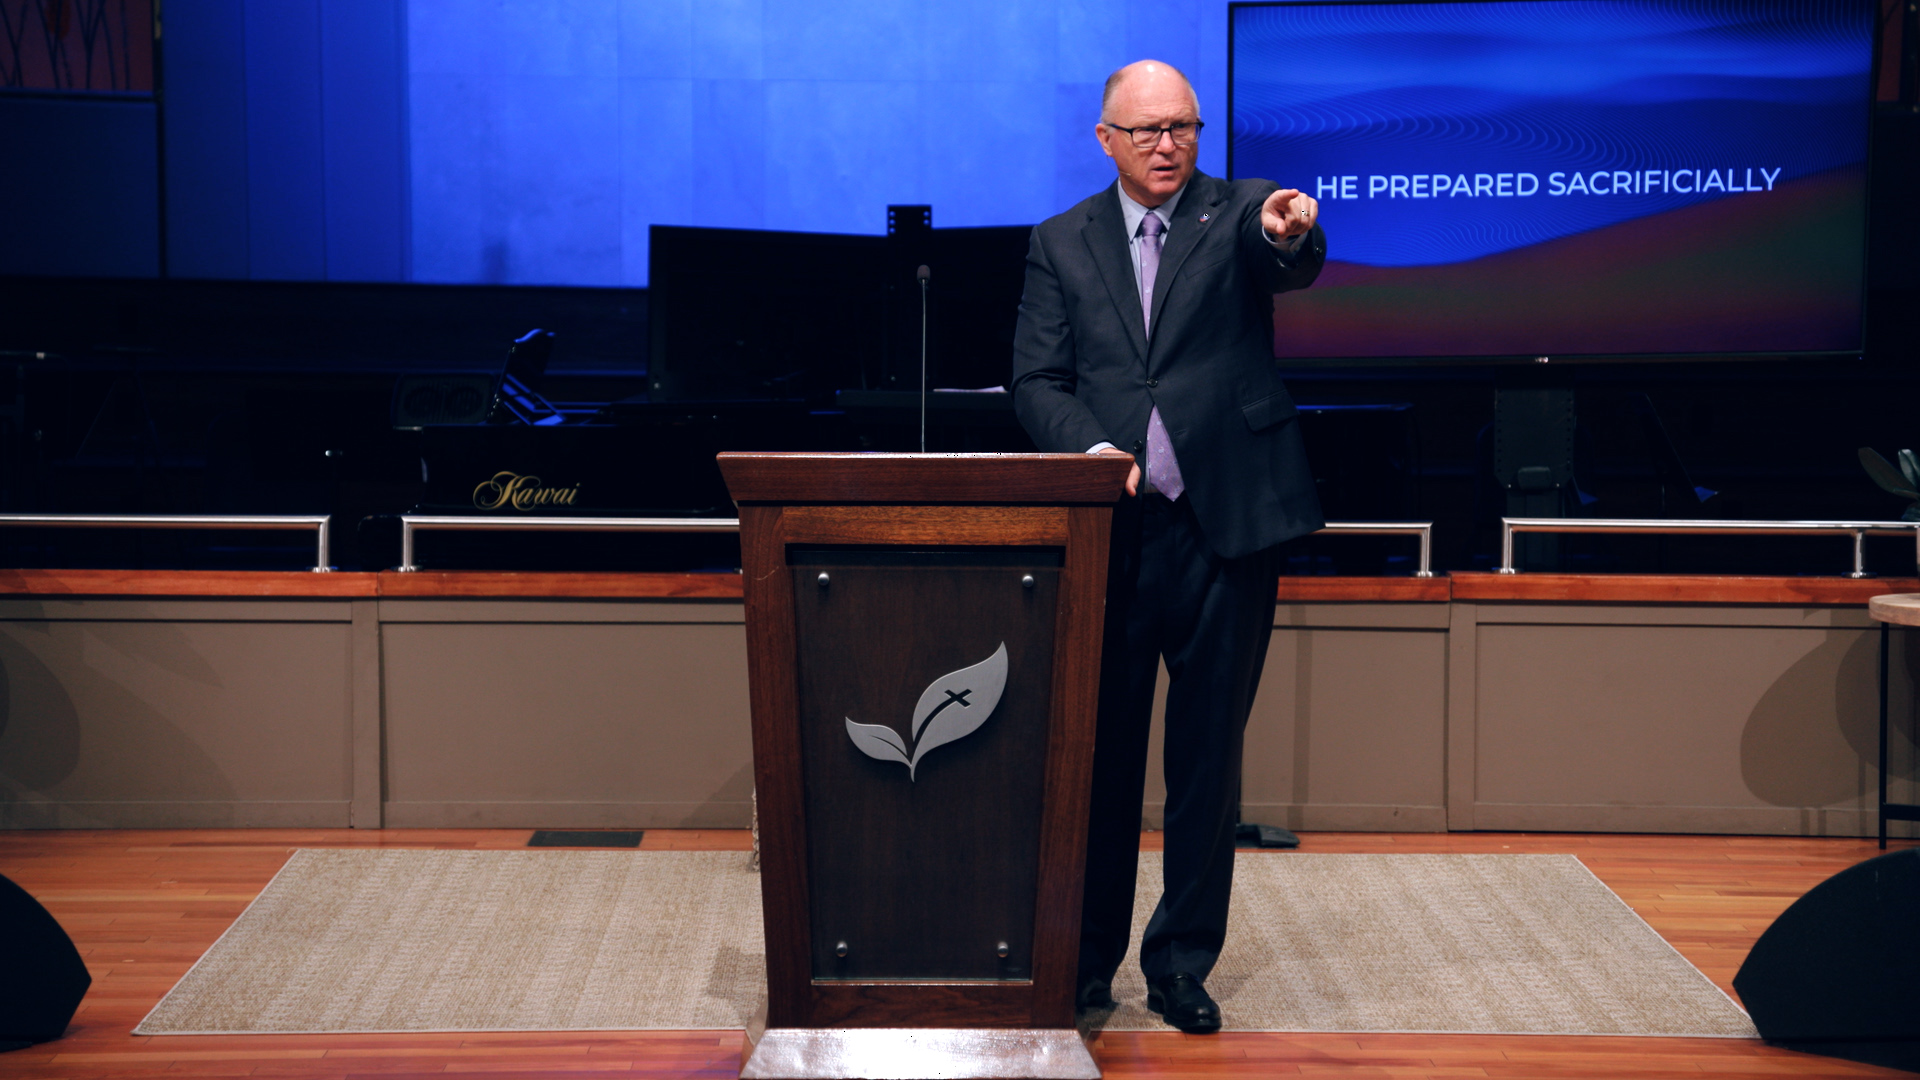 Pastor Paul Chappell: Trusting God for the Future